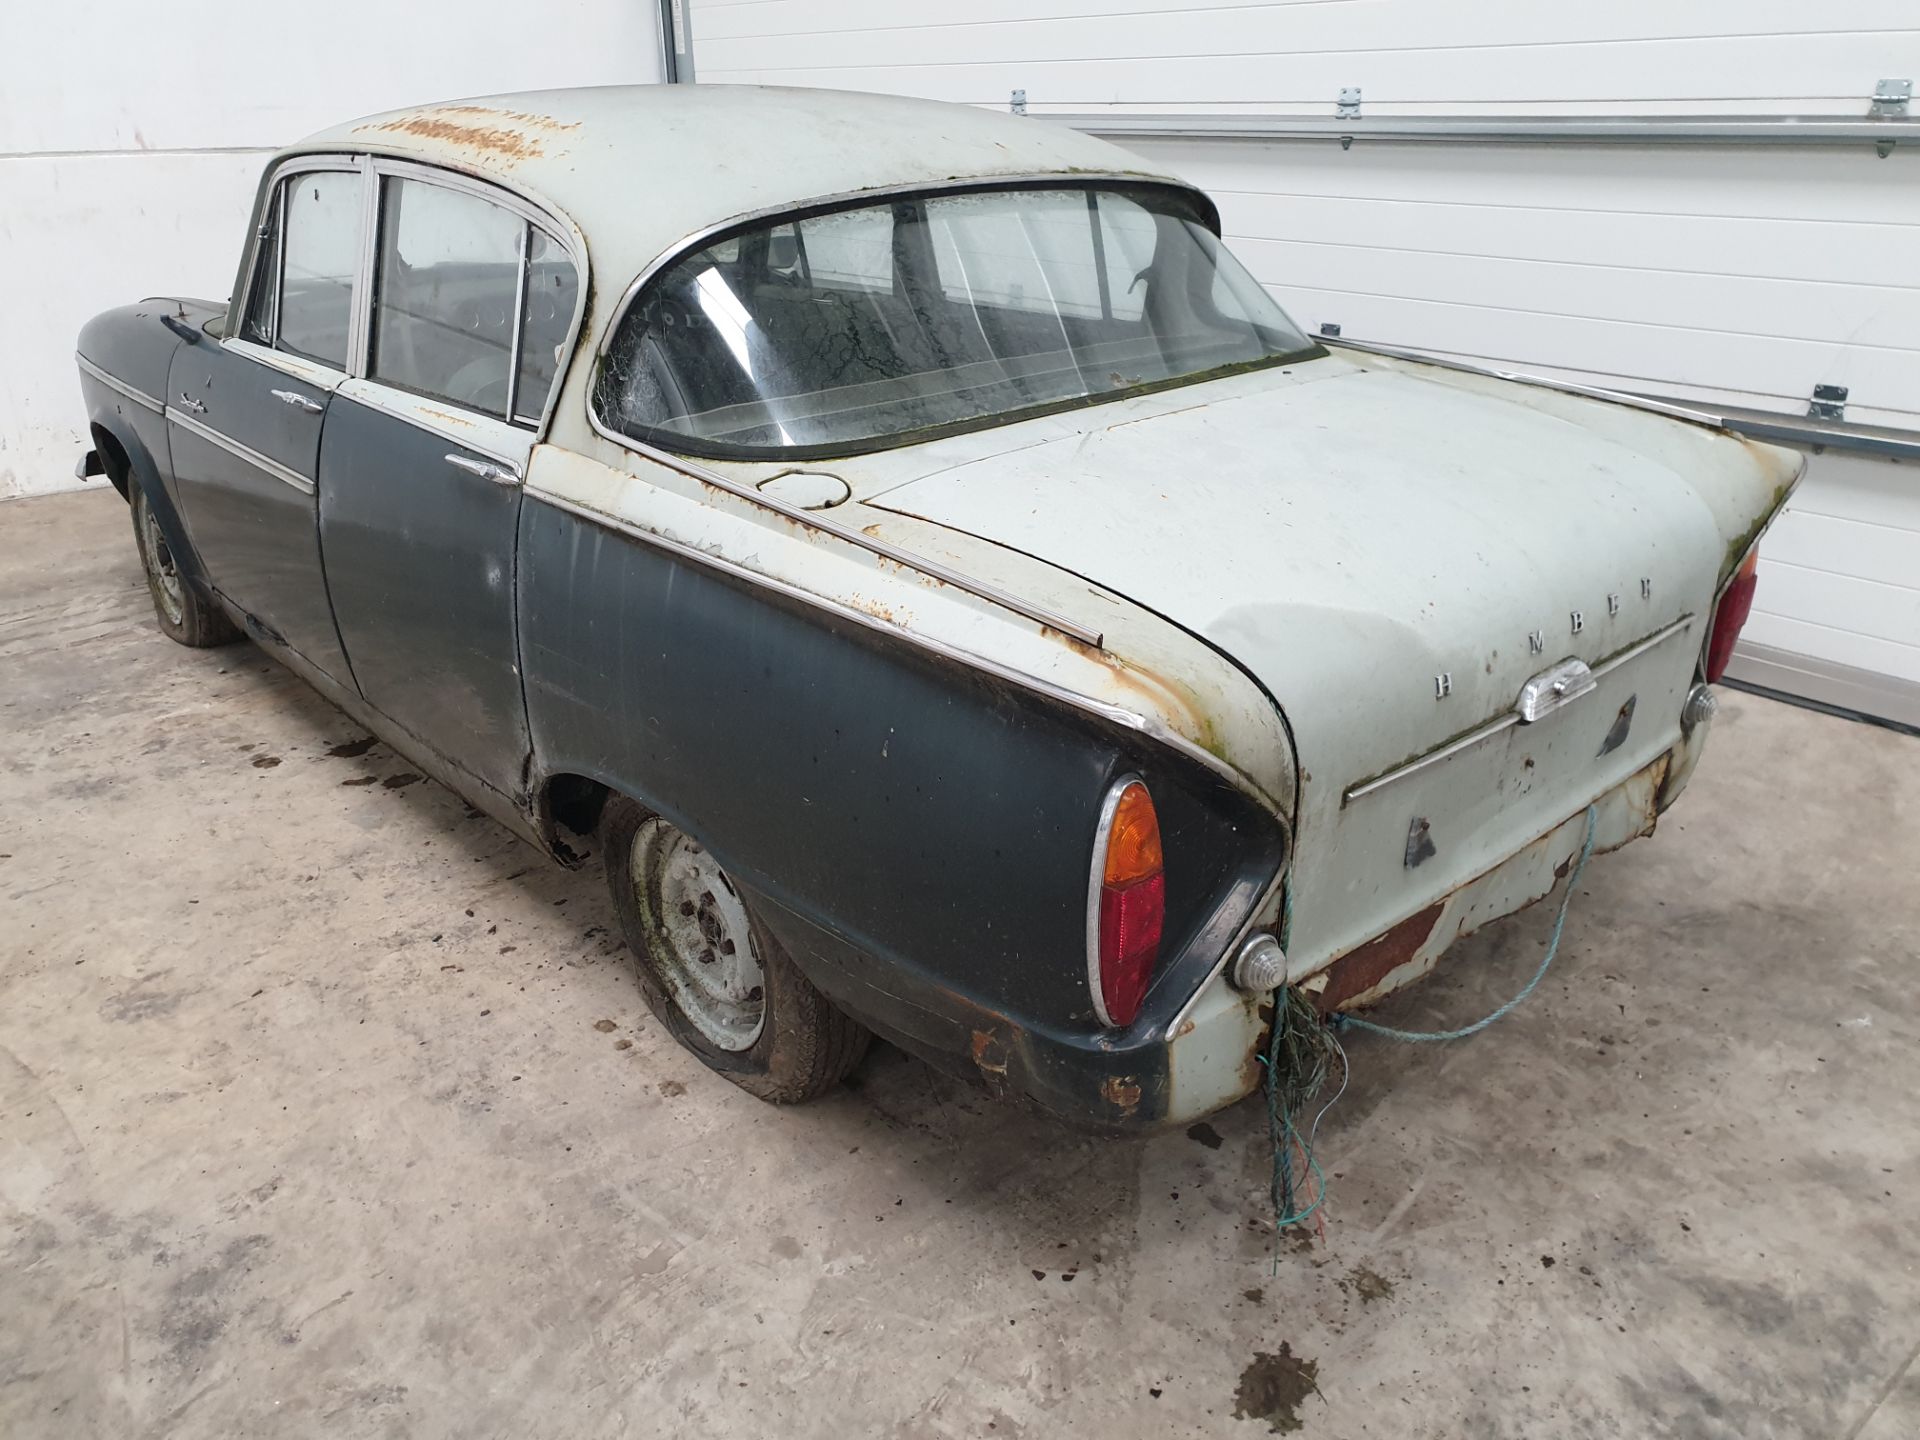 Humber Sceptre - Image 5 of 15